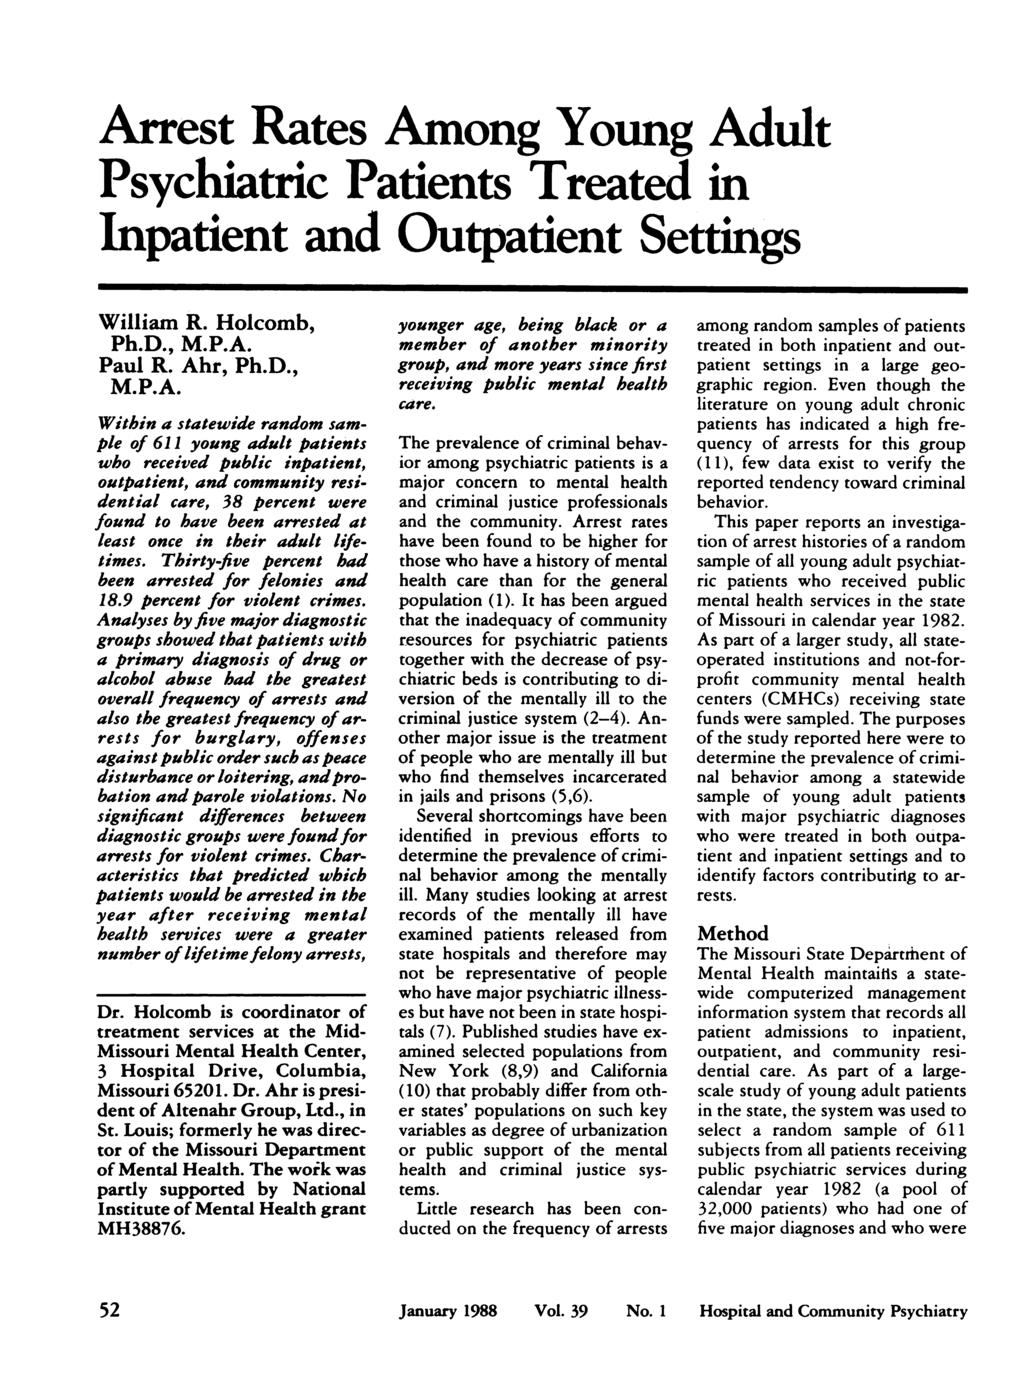 Arrest Rates Among Young Adult Psychiatric Patients Treated in Inpatient and Outpatient Settings William R. Holcomb, Ph.D., M.P.A. Paul R. Ahr, Ph.D., M.P.A. Within a statewide random sampie of 61 1